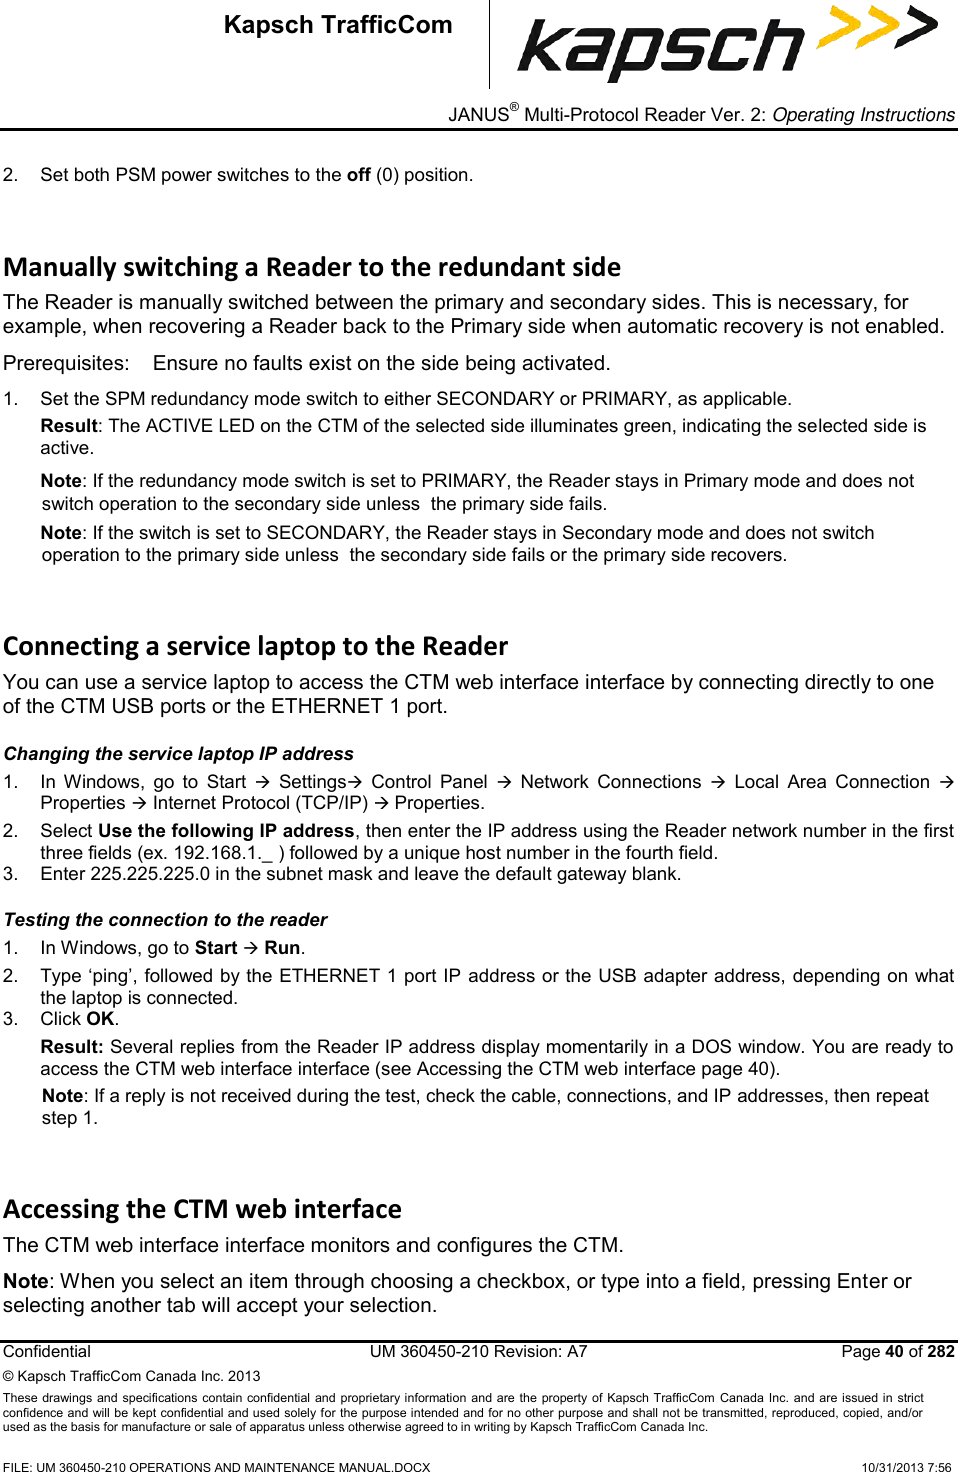 _ JANUS® Multi-Protocol Reader Ver. 2: Operating Instructions  Confidential  UM 360450-210 Revision: A7   Page 40 of 282 © Kapsch TrafficCom Canada Inc. 2013 These  drawings and specifications contain confidential  and  proprietary information and are  the  property of Kapsch TrafficCom  Canada Inc.  and are issued in strict confidence and will be kept confidential and used solely for the purpose intended and for no other purpose and shall not be transmitted, reproduced, copied, and/or used as the basis for manufacture or sale of apparatus unless otherwise agreed to in writing by Kapsch TrafficCom Canada Inc.  FILE: UM 360450-210 OPERATIONS AND MAINTENANCE MANUAL.DOCX    10/31/2013 7:56  Kapsch TrafficCom 2.  Set both PSM power switches to the off (0) position. Manually switching a Reader to the redundant side The Reader is manually switched between the primary and secondary sides. This is necessary, for example, when recovering a Reader back to the Primary side when automatic recovery is not enabled. Prerequisites:  Ensure no faults exist on the side being activated.  1.  Set the SPM redundancy mode switch to either SECONDARY or PRIMARY, as applicable.  Result: The ACTIVE LED on the CTM of the selected side illuminates green, indicating the selected side is active. Note: If the redundancy mode switch is set to PRIMARY, the Reader stays in Primary mode and does not switch operation to the secondary side unless  the primary side fails.  Note: If the switch is set to SECONDARY, the Reader stays in Secondary mode and does not switch operation to the primary side unless  the secondary side fails or the primary side recovers.  Connecting a service laptop to the Reader  You can use a service laptop to access the CTM web interface interface by connecting directly to one of the CTM USB ports or the ETHERNET 1 port. Changing the service laptop IP address 1.  In  Windows,  go  to  Start    Settings  Control  Panel    Network  Connections    Local  Area  Connection   Properties  Internet Protocol (TCP/IP)  Properties.  2.  Select Use the following IP address, then enter the IP address using the Reader network number in the first three fields (ex. 192.168.1._ ) followed by a unique host number in the fourth field.  3.  Enter 225.225.225.0 in the subnet mask and leave the default gateway blank. Testing the connection to the reader 1.  In Windows, go to Start  Run. 2.  Type ‘ping’, followed by the ETHERNET 1 port IP address or the USB adapter address, depending on what the laptop is connected. 3.  Click OK. Result: Several replies from the Reader IP address display momentarily in a DOS window. You are ready to access the CTM web interface interface (see Accessing the CTM web interface page 40). Note: If a reply is not received during the test, check the cable, connections, and IP addresses, then repeat step 1. Accessing the CTM web interface The CTM web interface interface monitors and configures the CTM. Note: When you select an item through choosing a checkbox, or type into a field, pressing Enter or selecting another tab will accept your selection. 